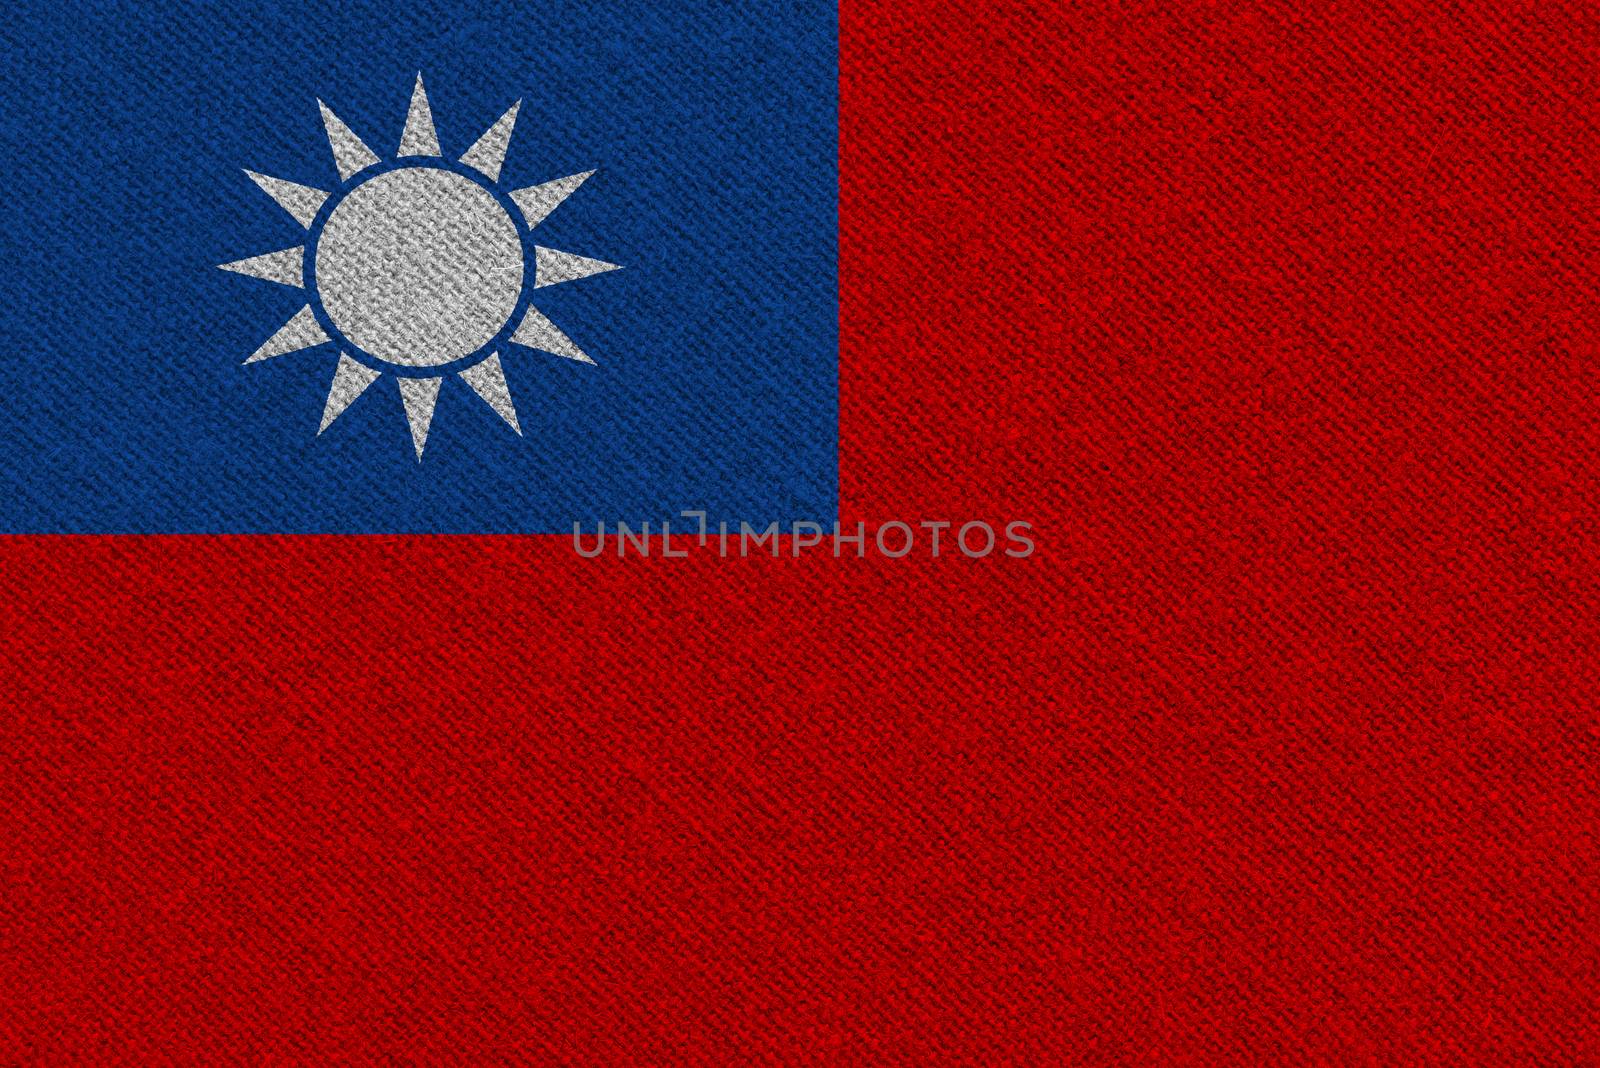 Taiwan fabric flag. Patriotic background. National flag of Taiwan